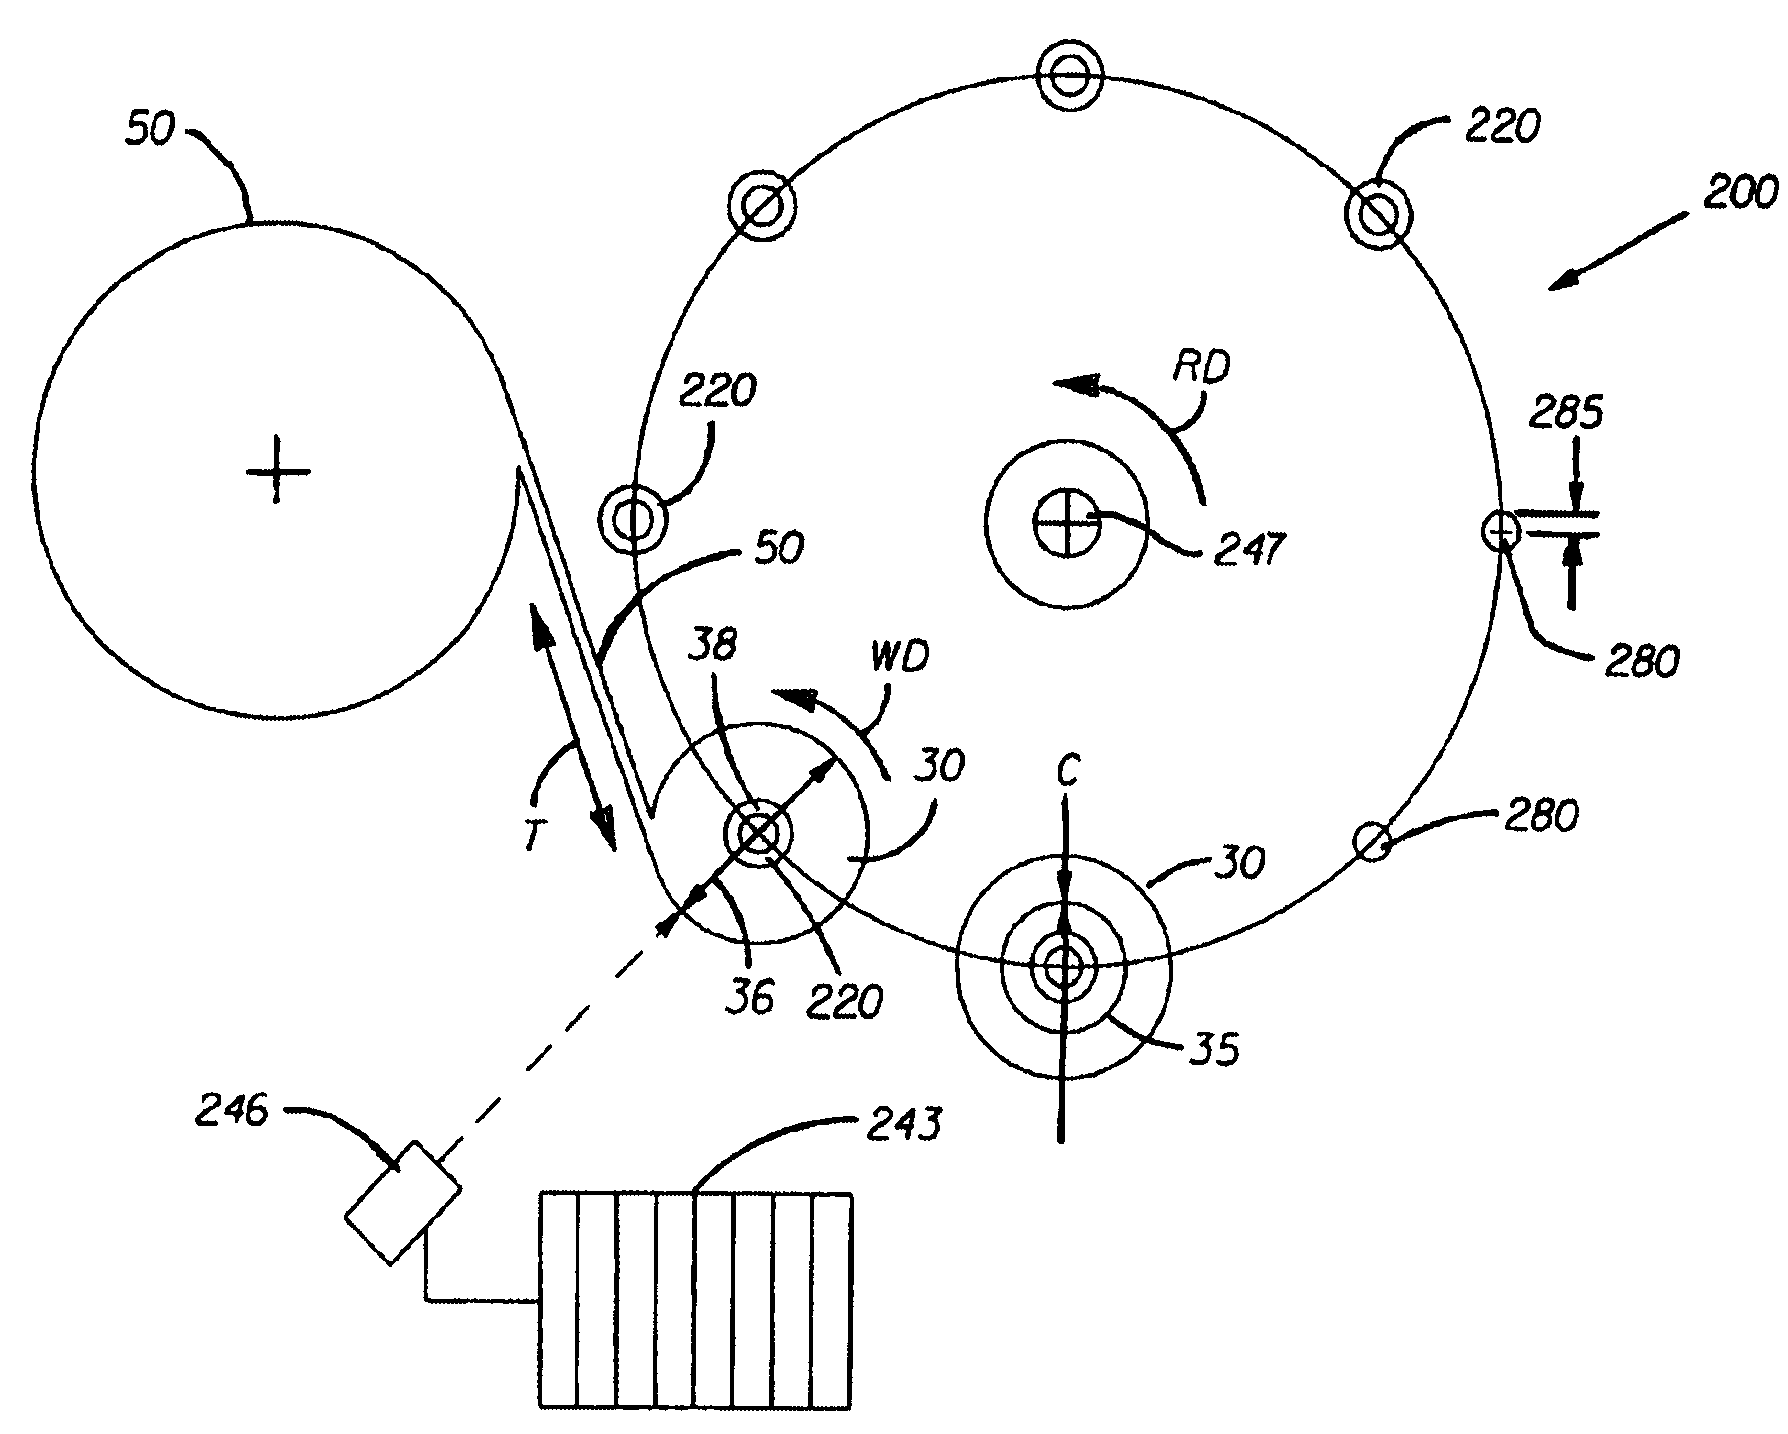 Consumer product winding control and adjustment